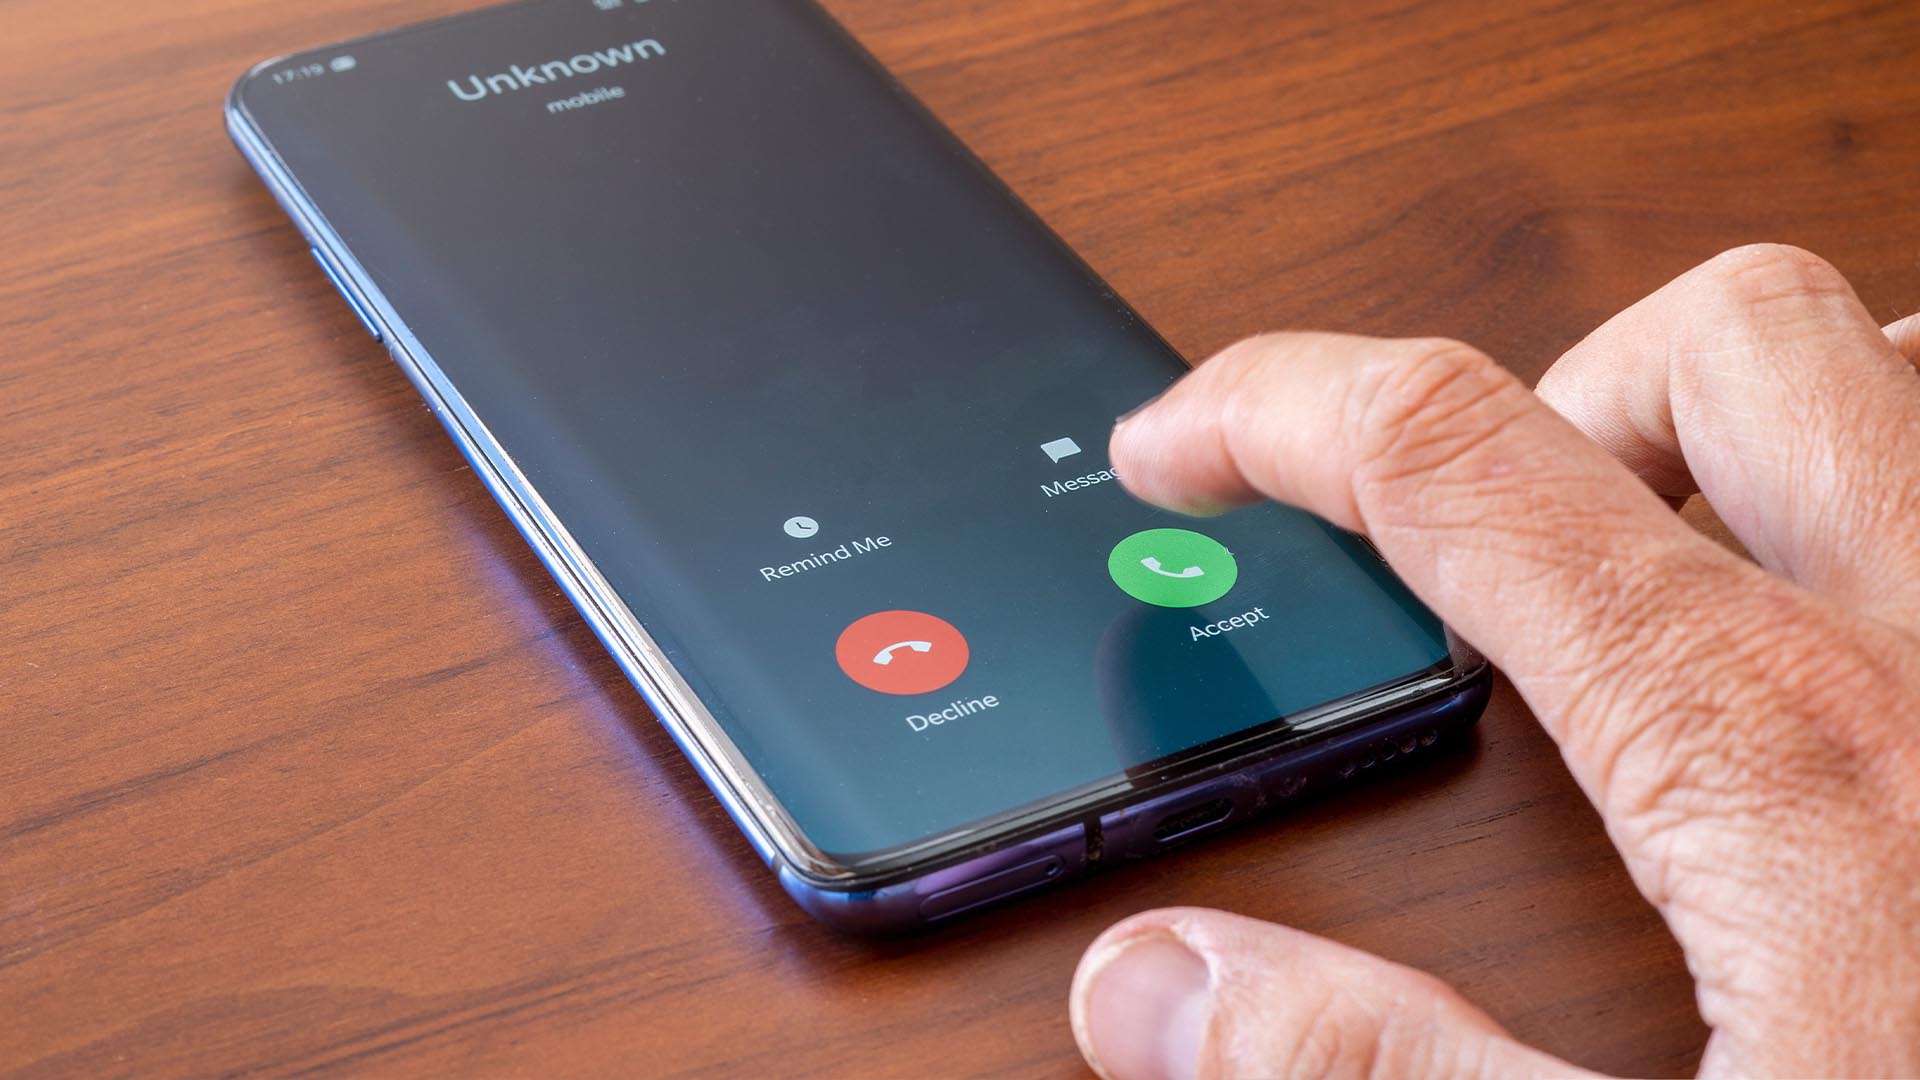 accepting an unknown call